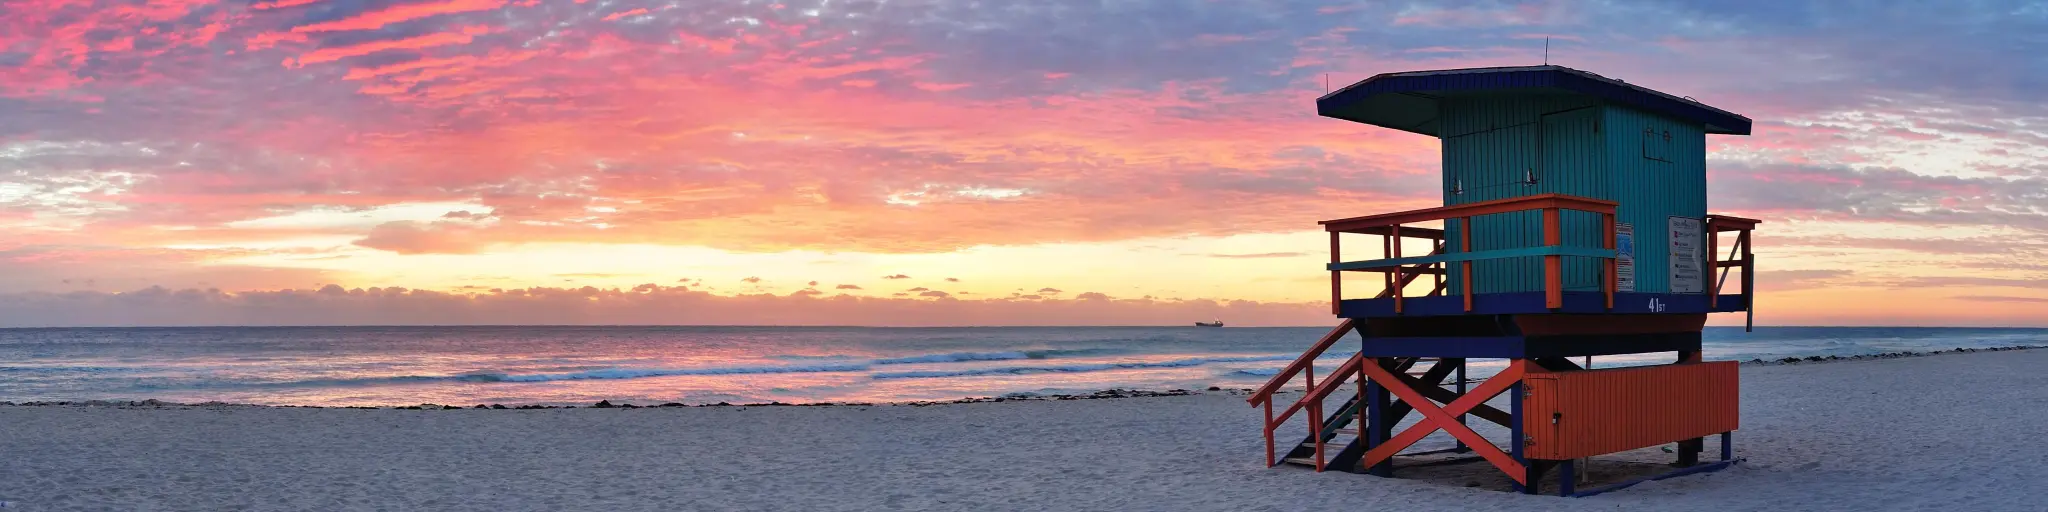 A panoramic view of Miami's South Beach at sunset, with a turqoise-painted lifeguard tower standing on the sand